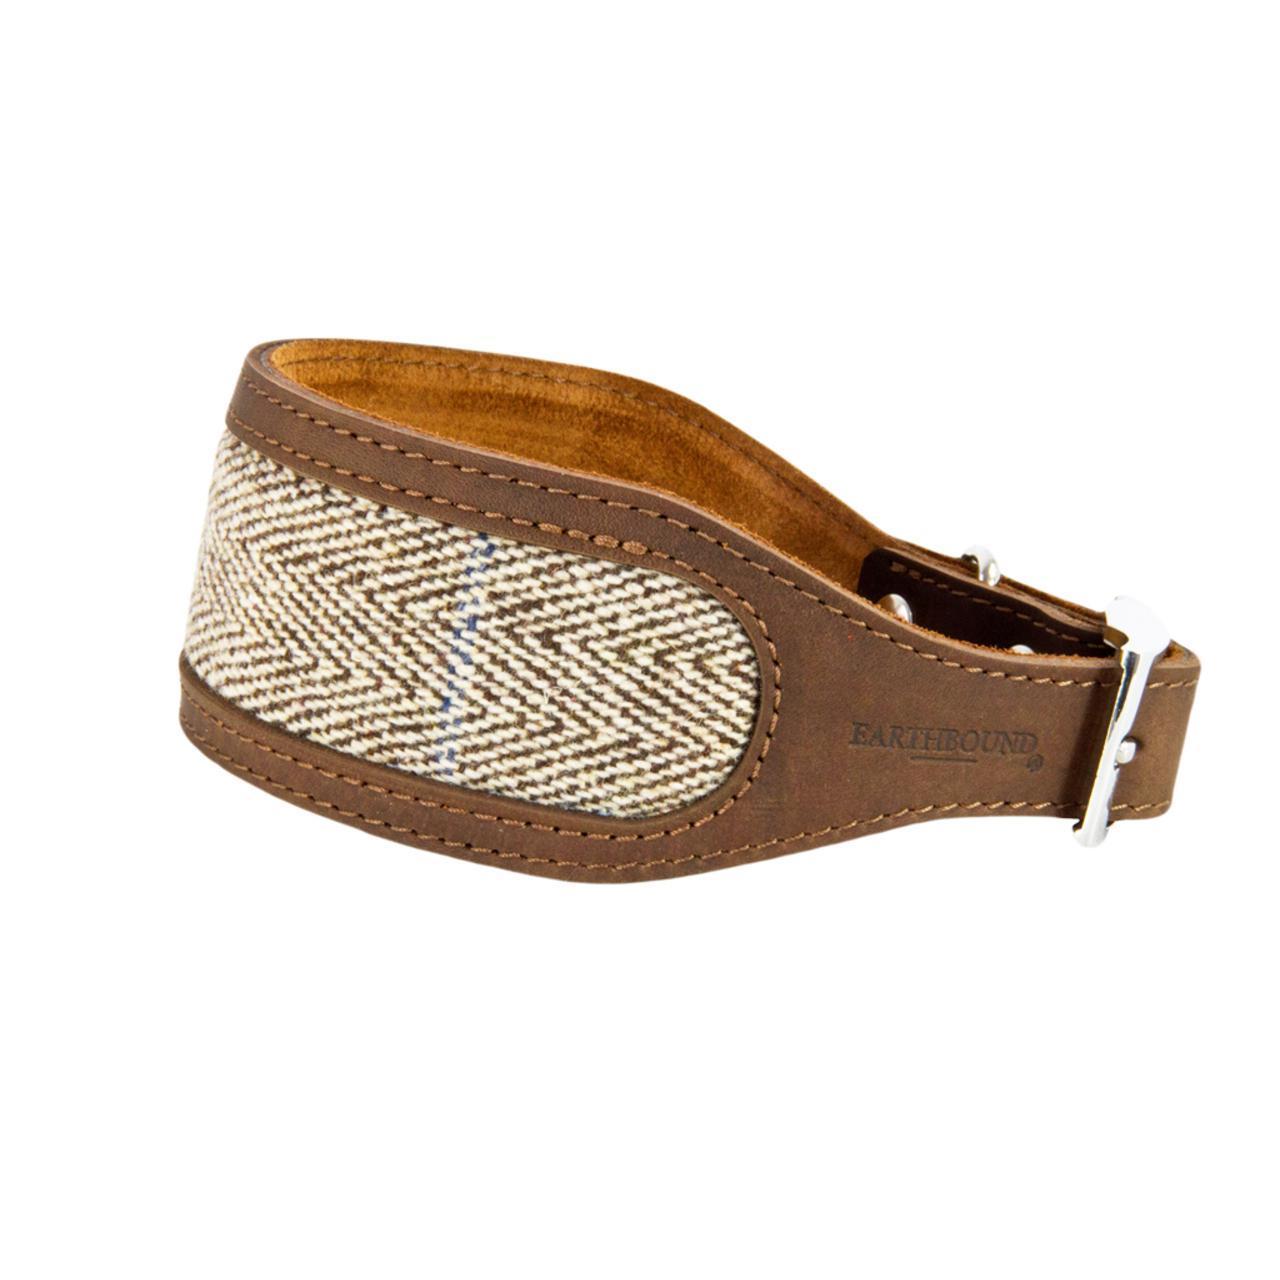 An image of Earthbound Tweed & Leather Whippet & Greyhound Collar Beige 33 - 39cm